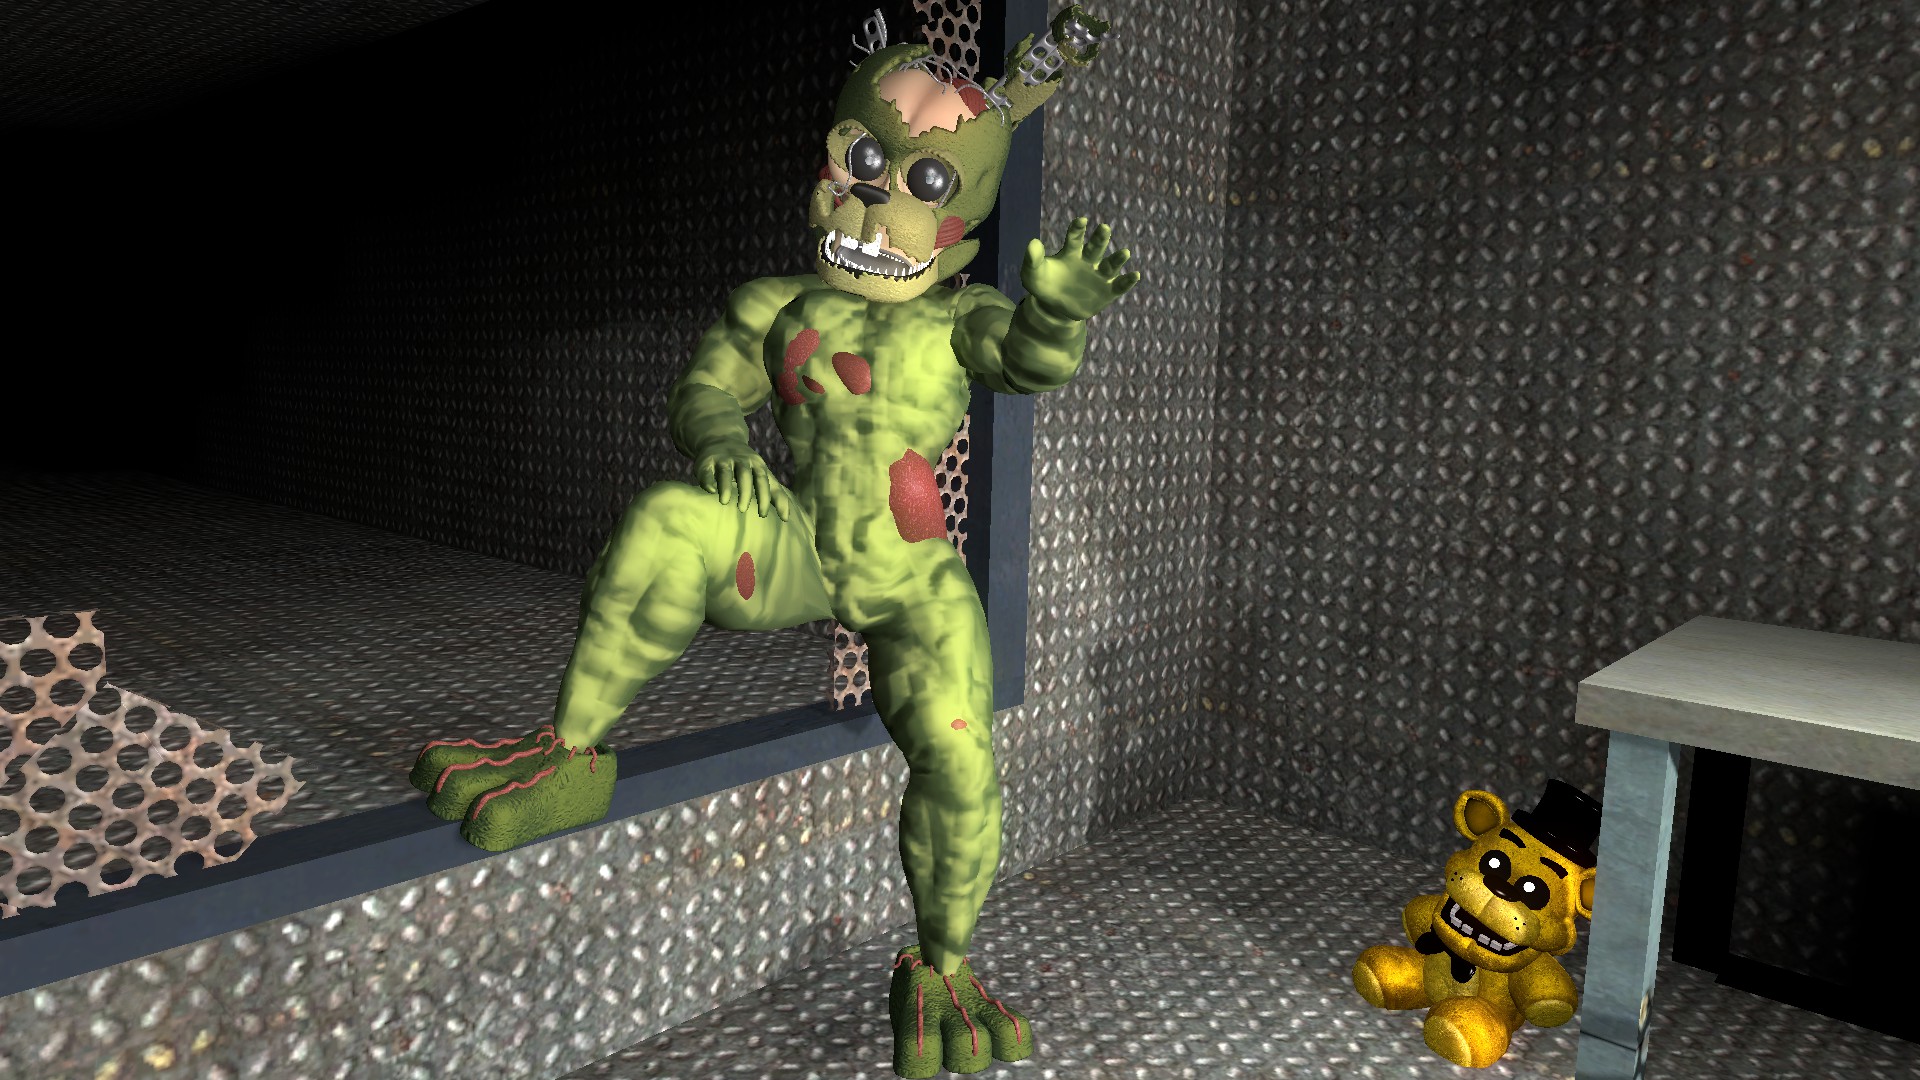 Muscle Springtrap/william Afton - William Afton Is Springtrap - HD Wallpaper 